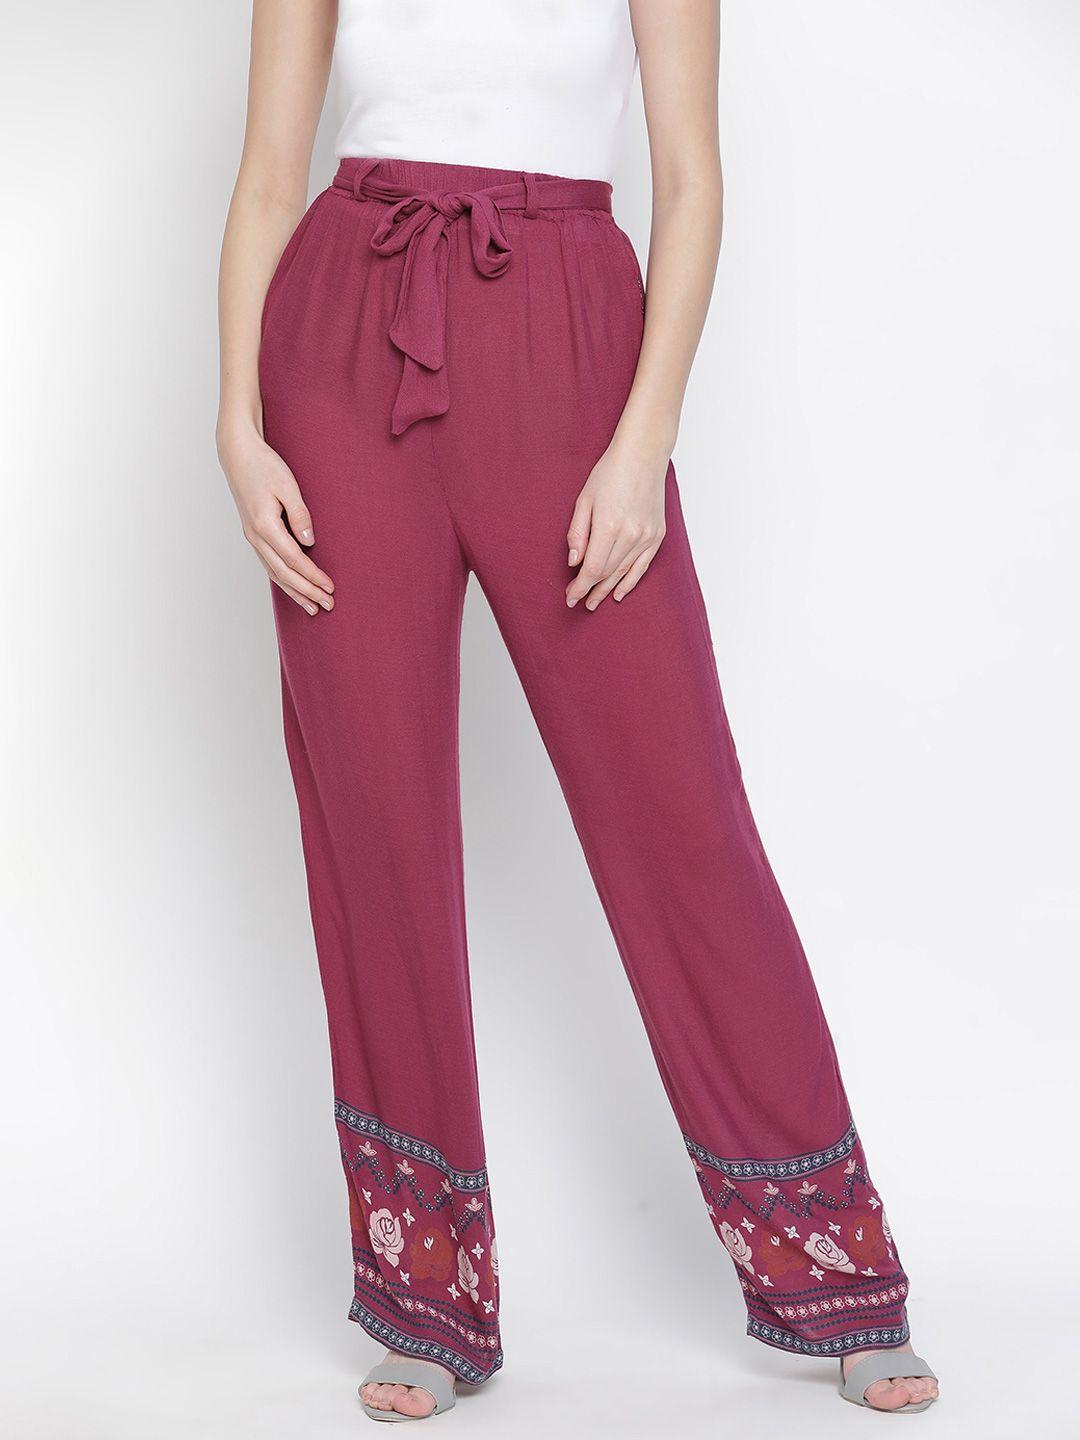 oxolloxo women maroon floral print trousers